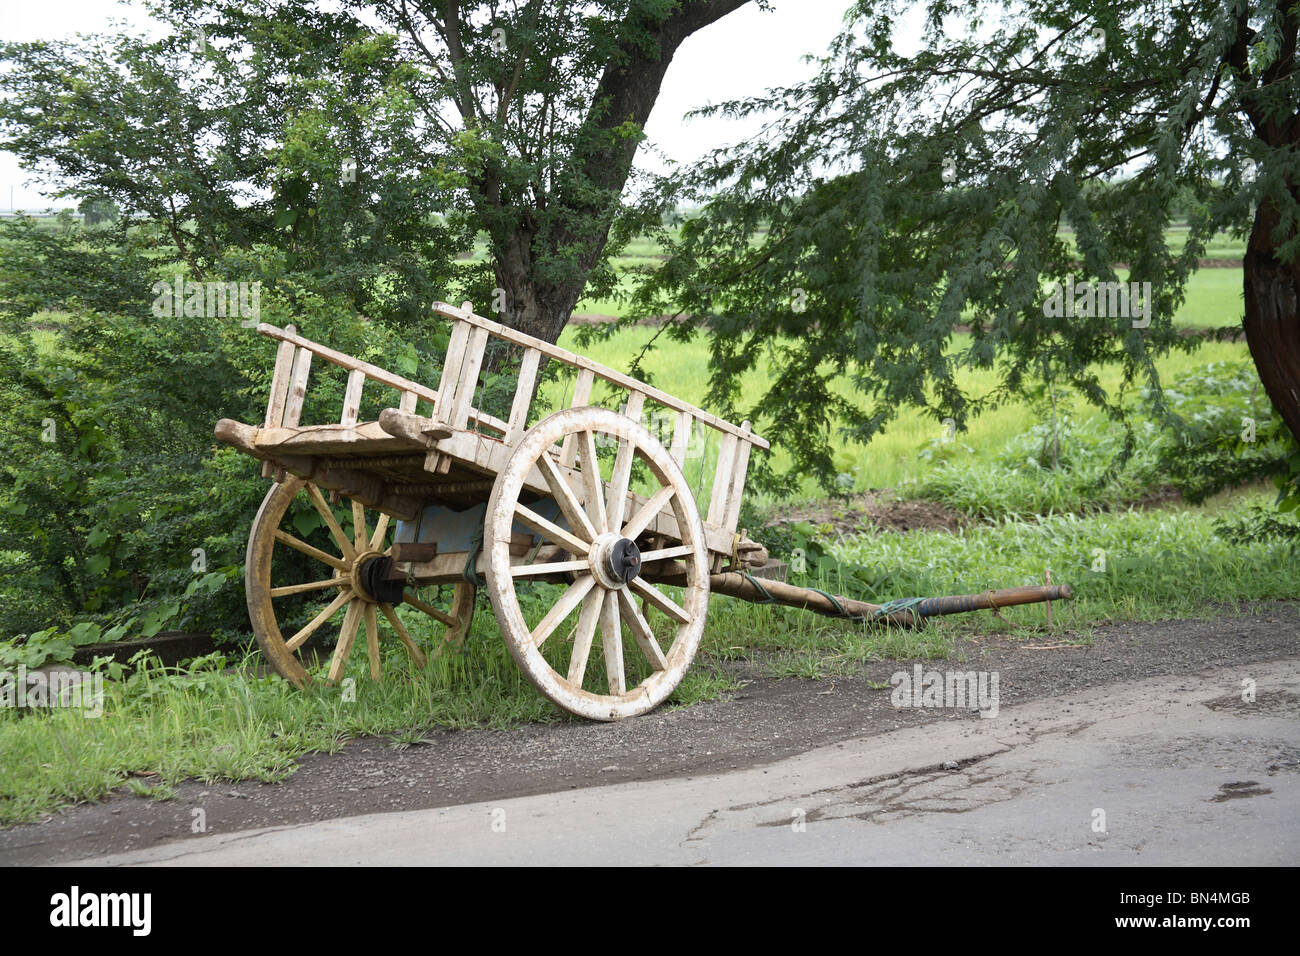 Bullock cart without bulls parked at the side of the road ; India Stock Photo